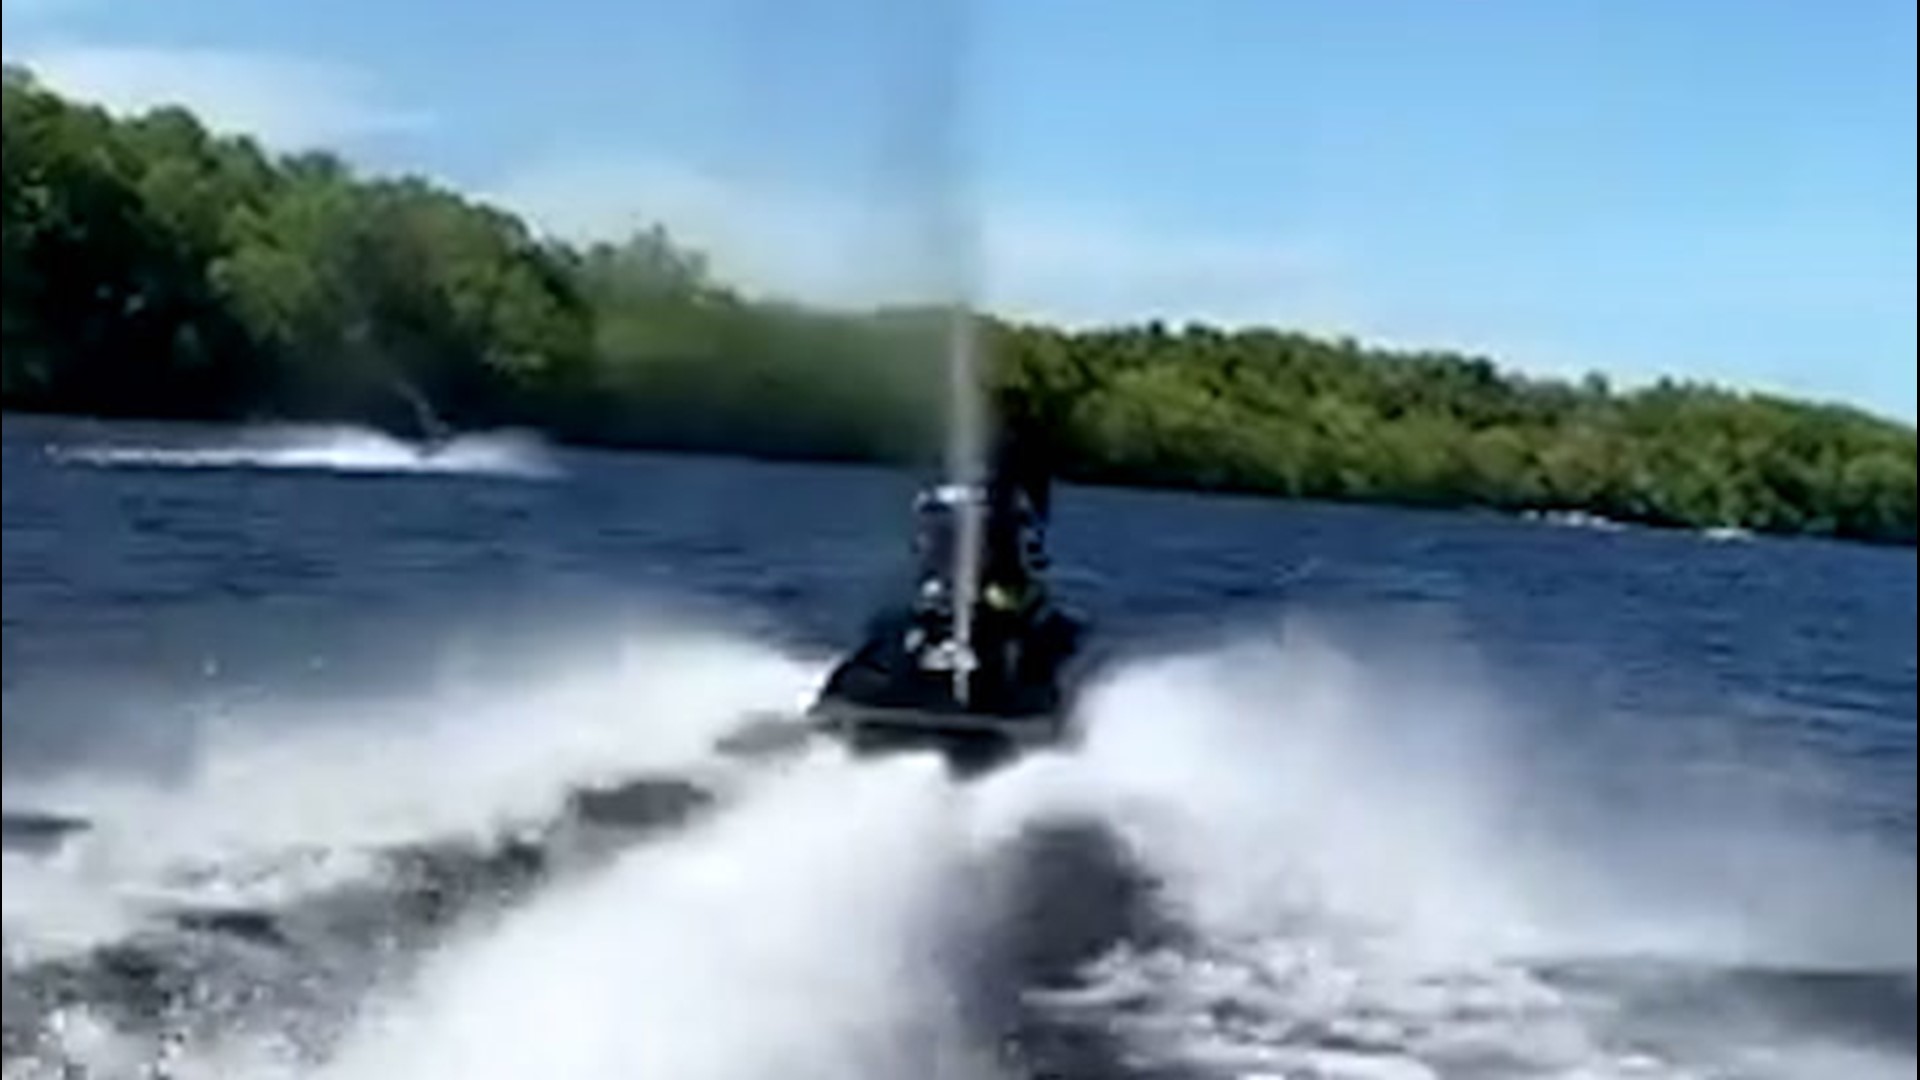 People enjoyed a taste of summer weather by going out to the Merrimack River for some jet skiing in West Newbury, Massachusetts, on May 27.